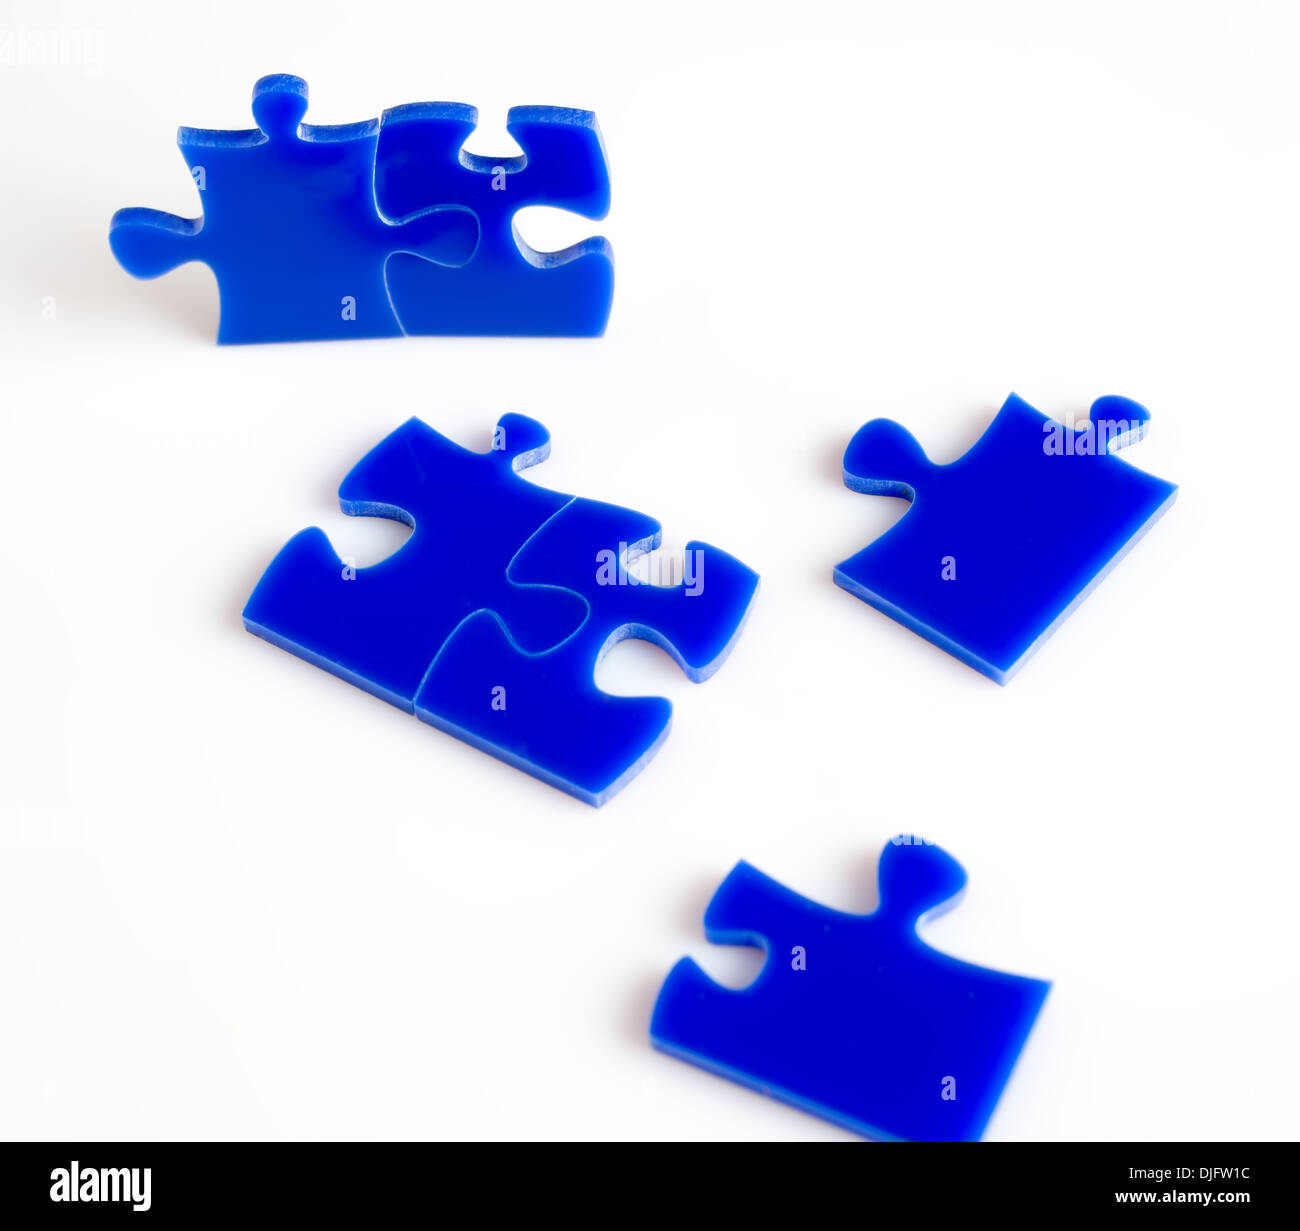 Blue Jigsaw puzzles blocks isolated on a white background. Stock Photo